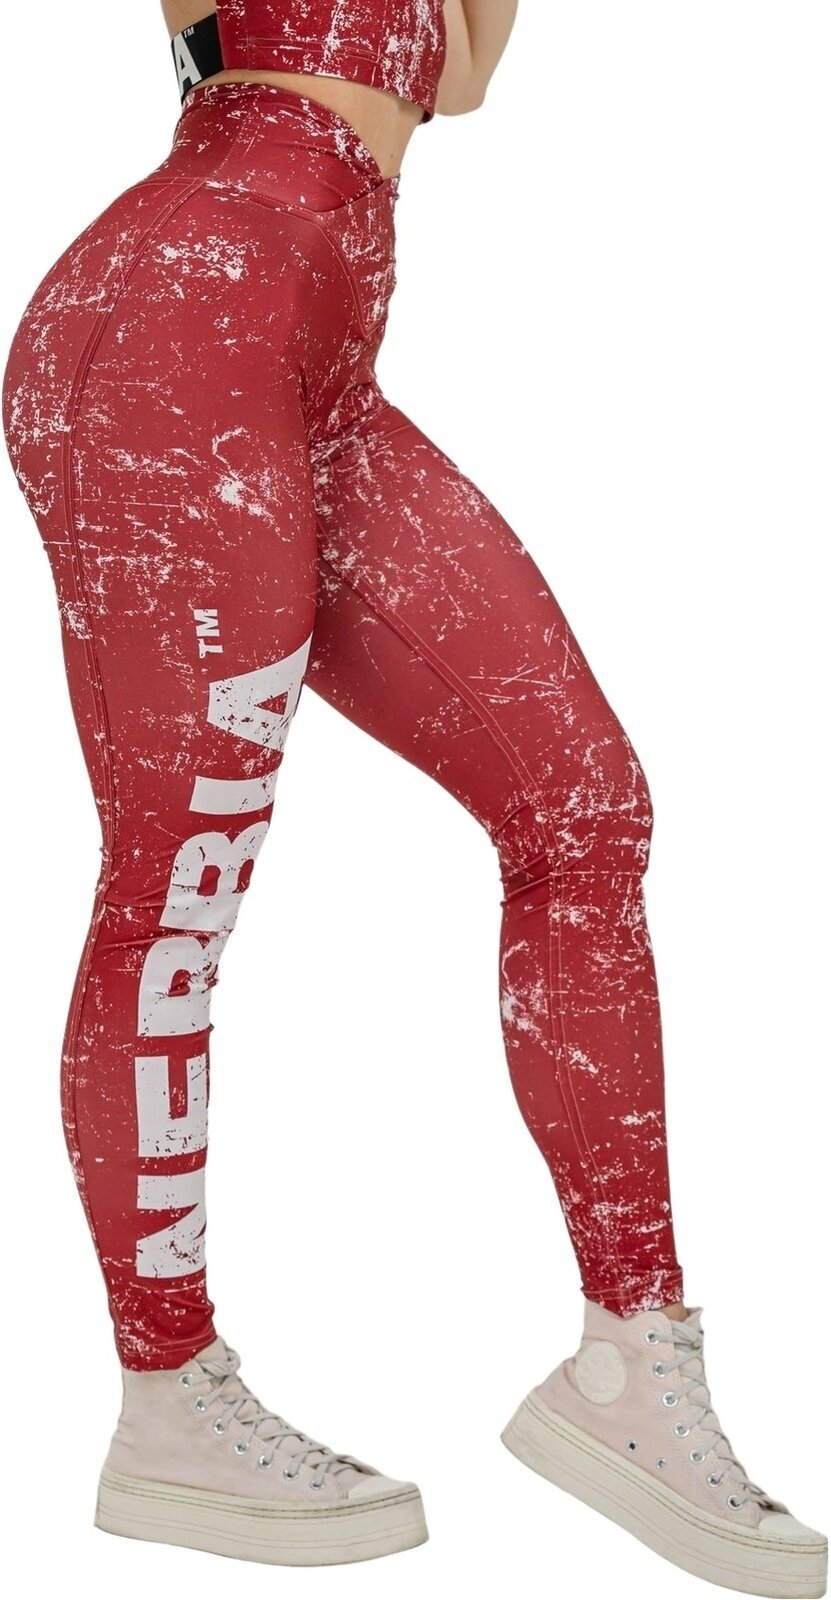 Fitness Trousers Nebbia Workout Leggings Rough Girl Red XS Fitness Trousers